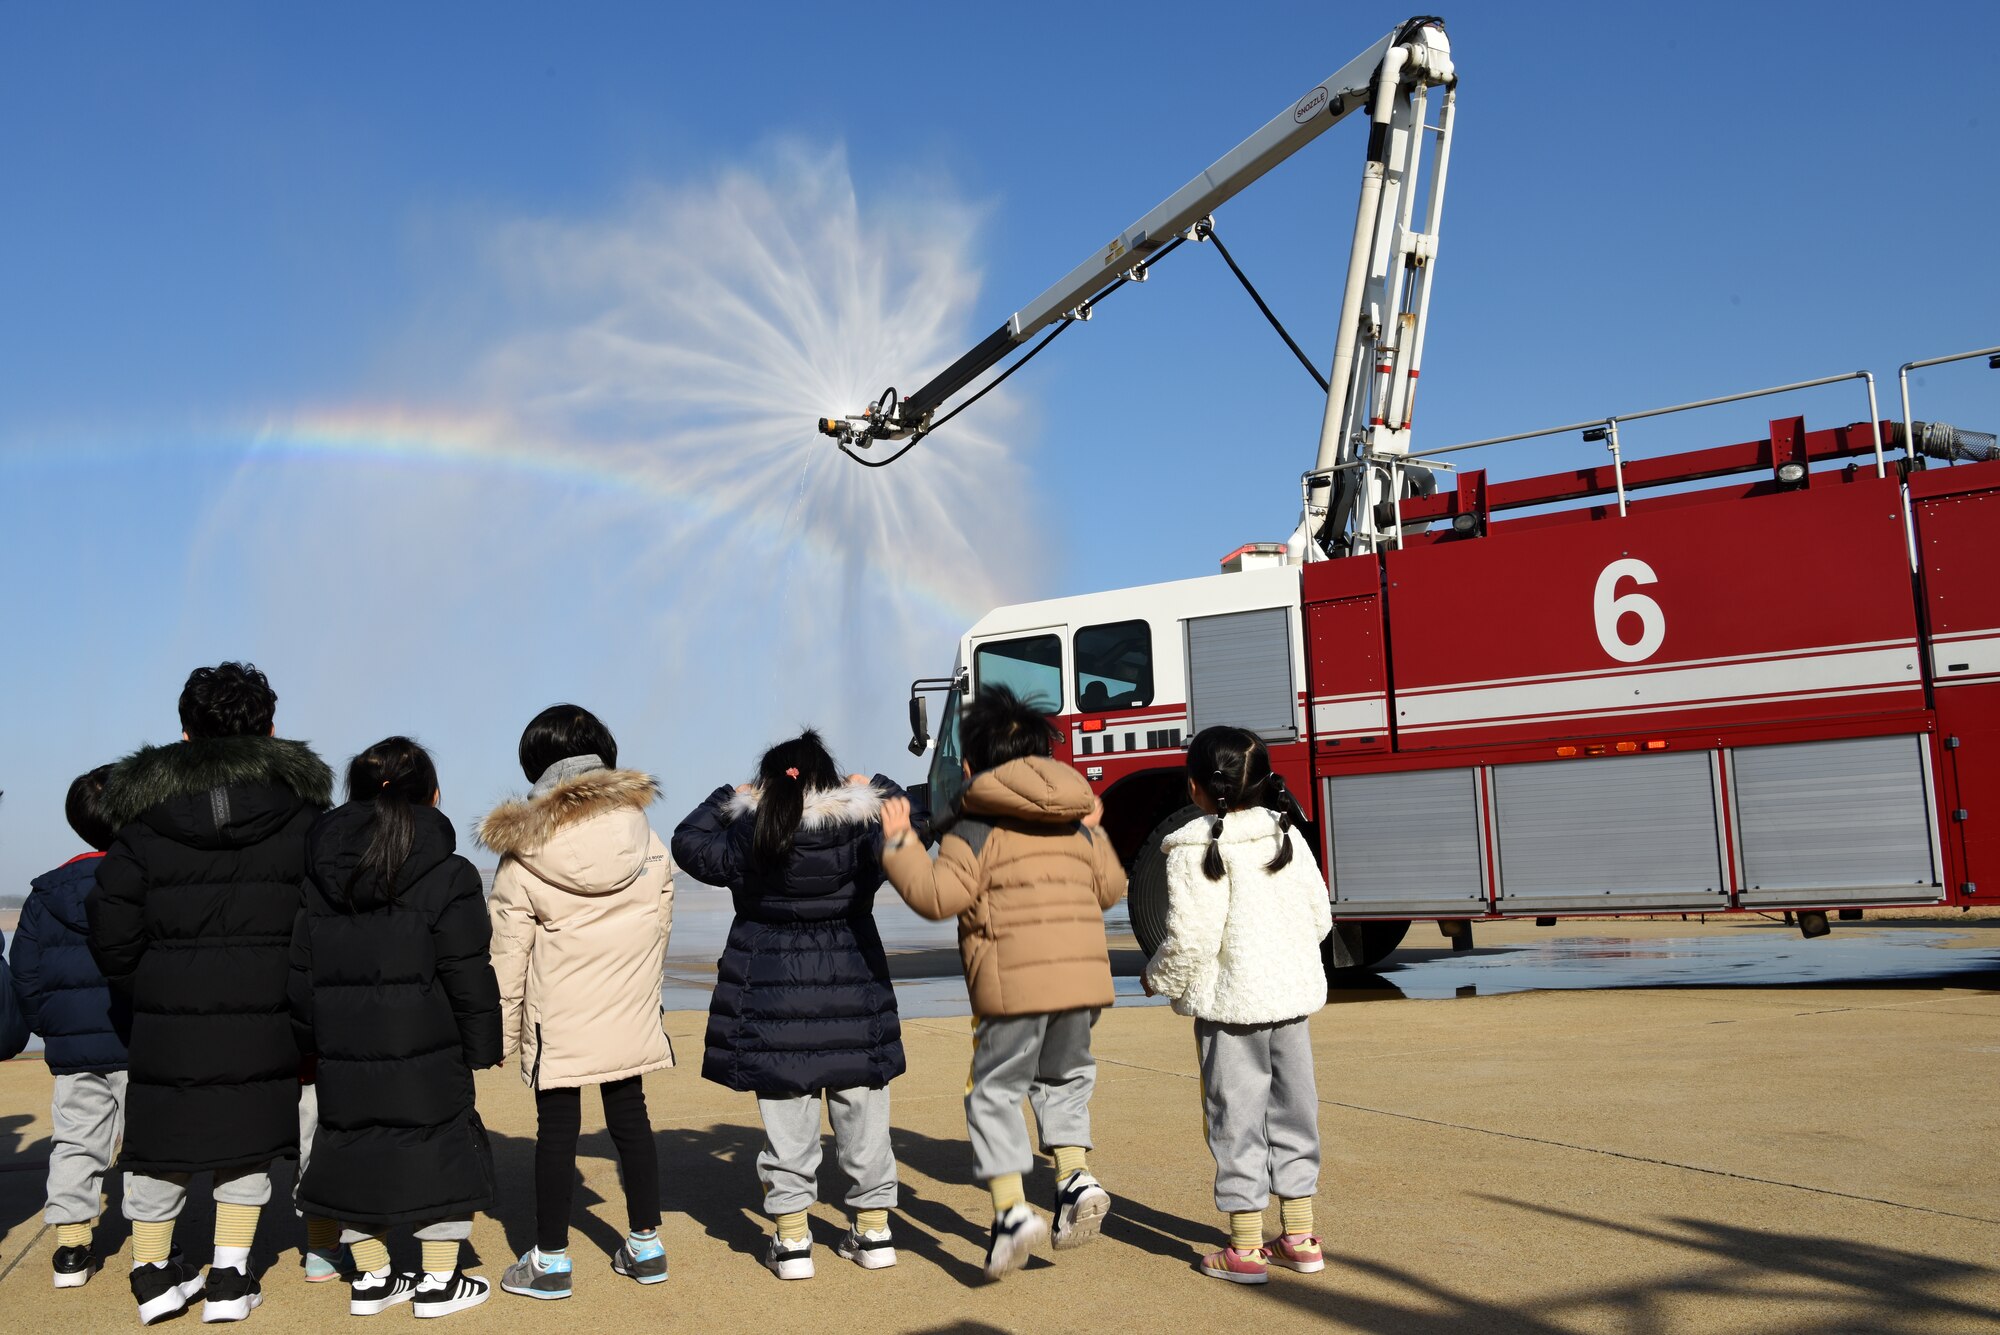 Korean Christian International School students watch a fire truck spray water at Kunsan Air Base, Republic of Korea, Nov. 30, 2018. During the visit, the children toured the 8th Civil Engineer Squadron fire house and met with both Korean and American firefighters. (U.S. Air Force photo by Staff Sgt. Joshua Edwards)